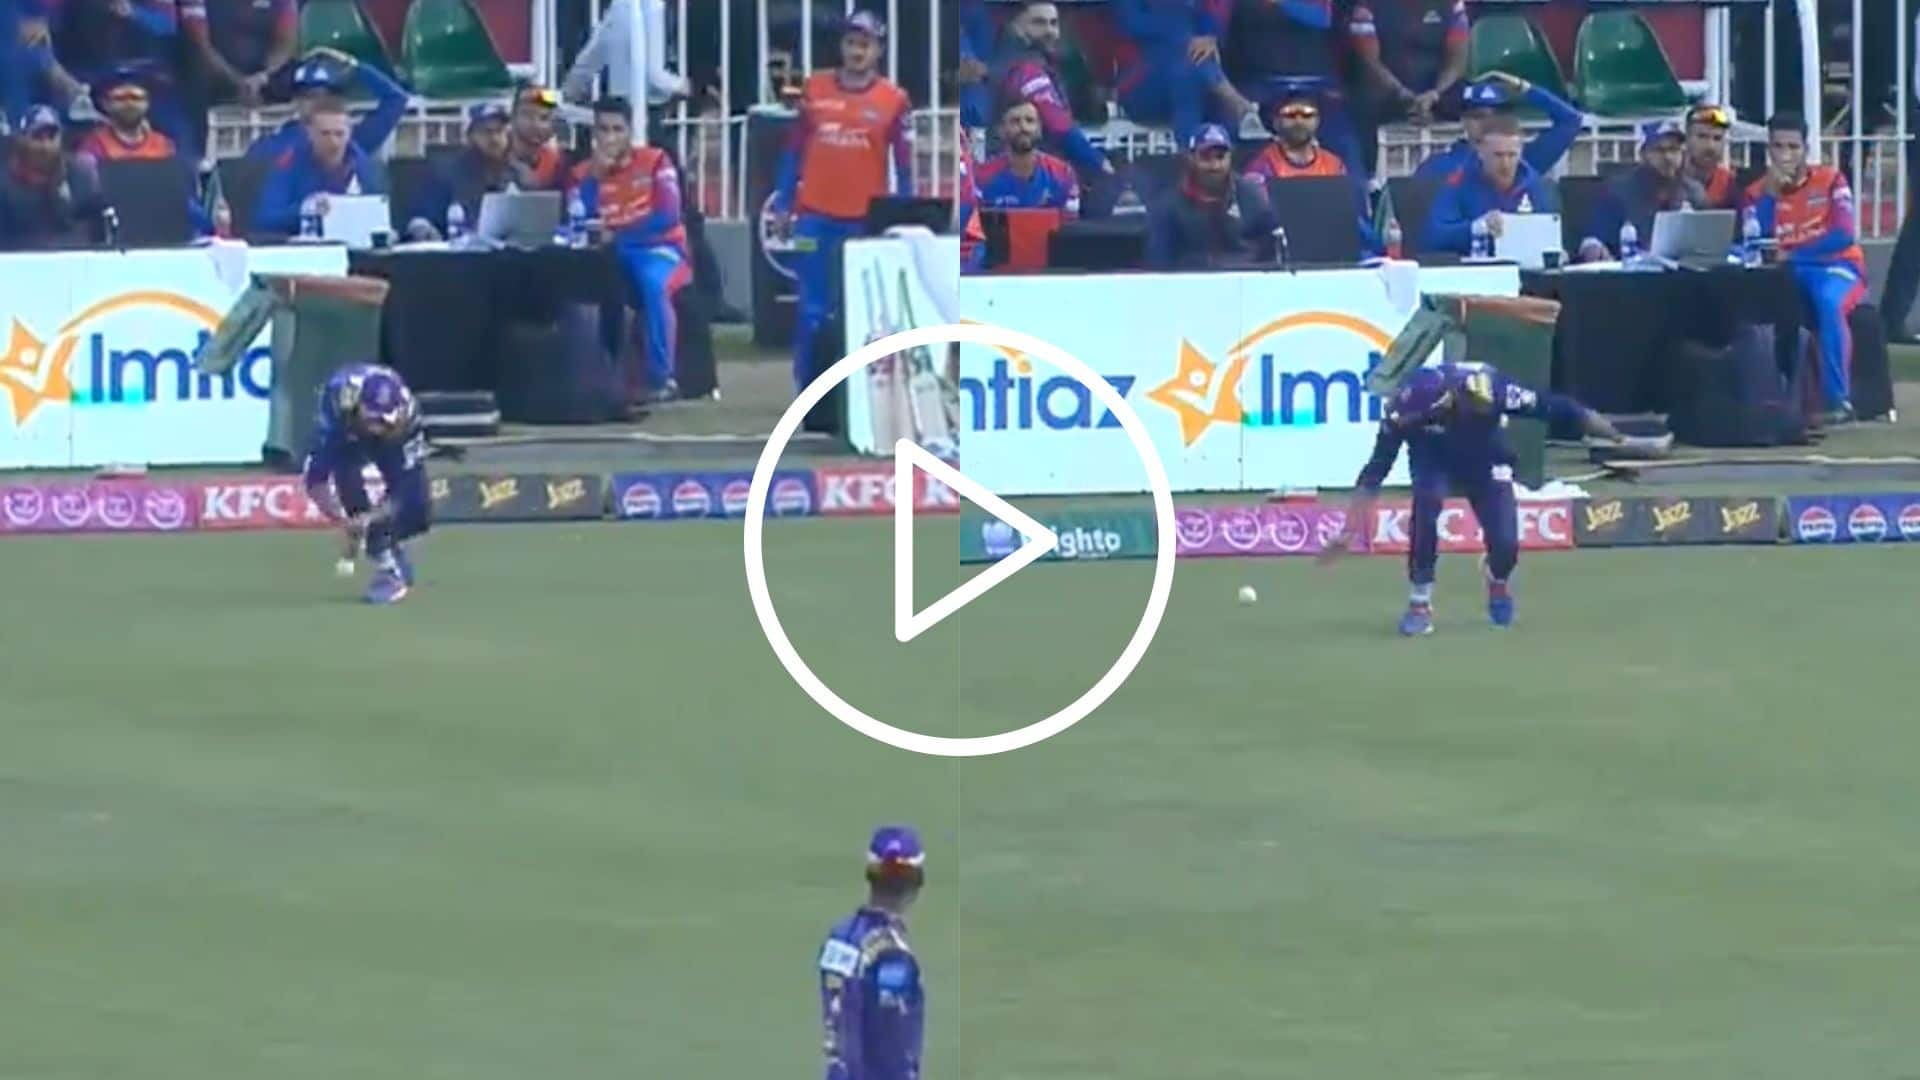 [Watch] Mohammad Amir's Ridiculously Sloppy Fielding Leaves Him Humiliated In PSL